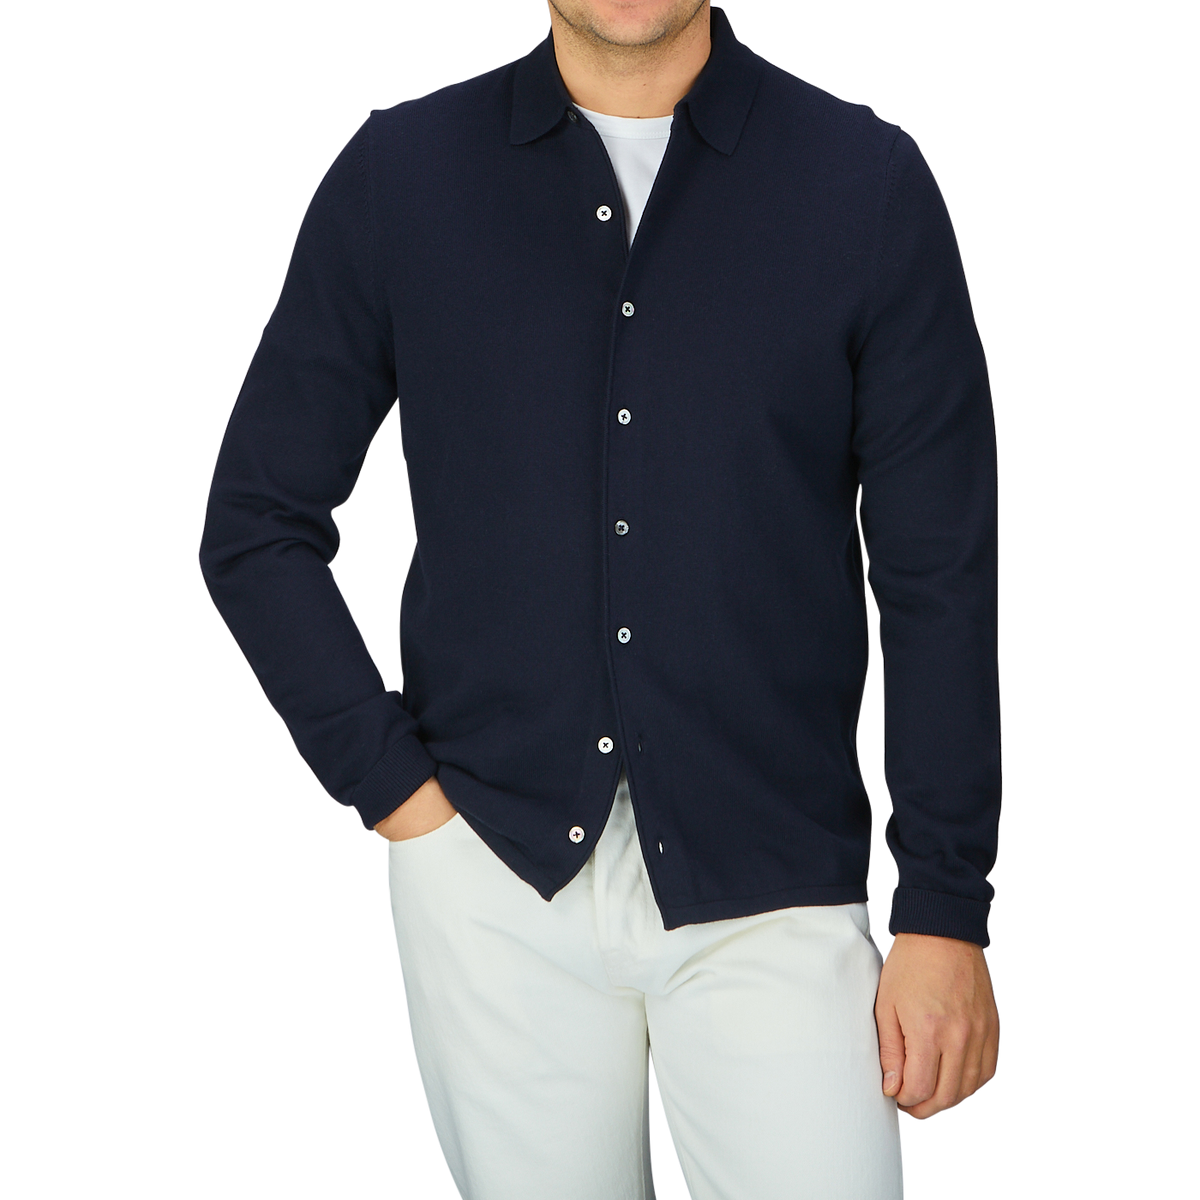 A man wearing a navy blue Alan Paine Luxury Cotton Knitted Overshirt and white pants.